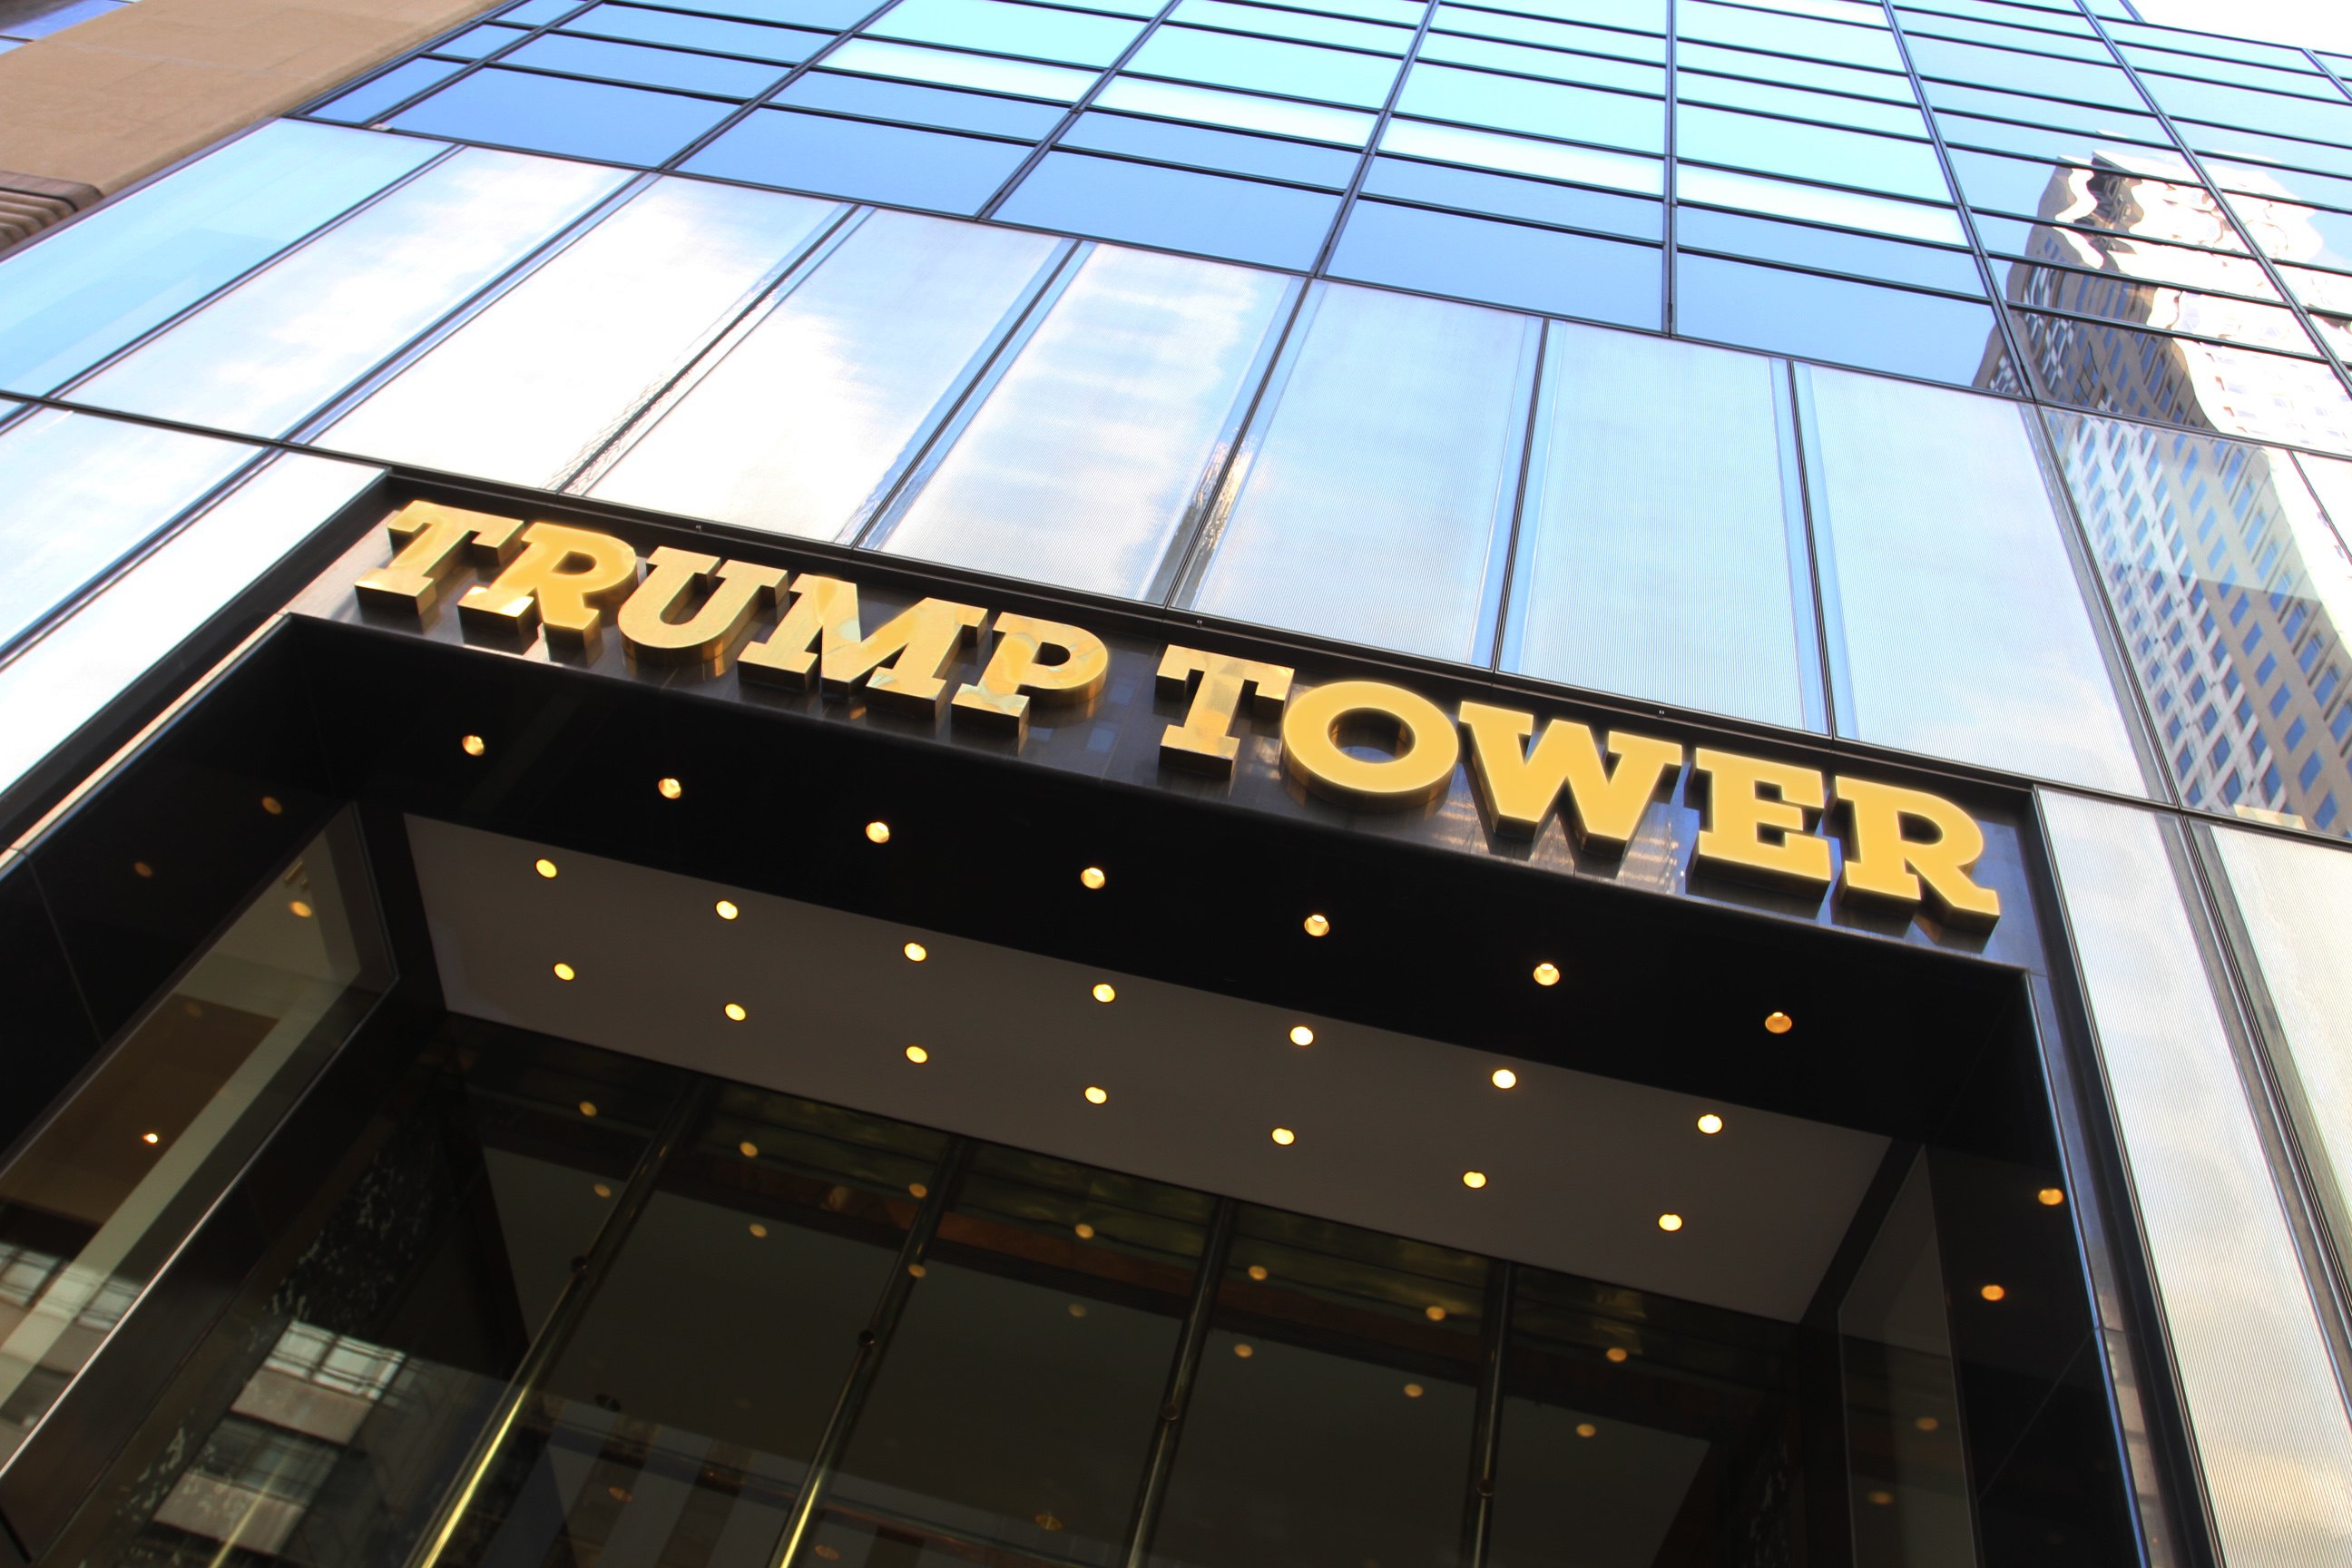 PHOTO: In this file photo shows the exterior of Trump Tower in New York City,  Aug. 24, 2013.